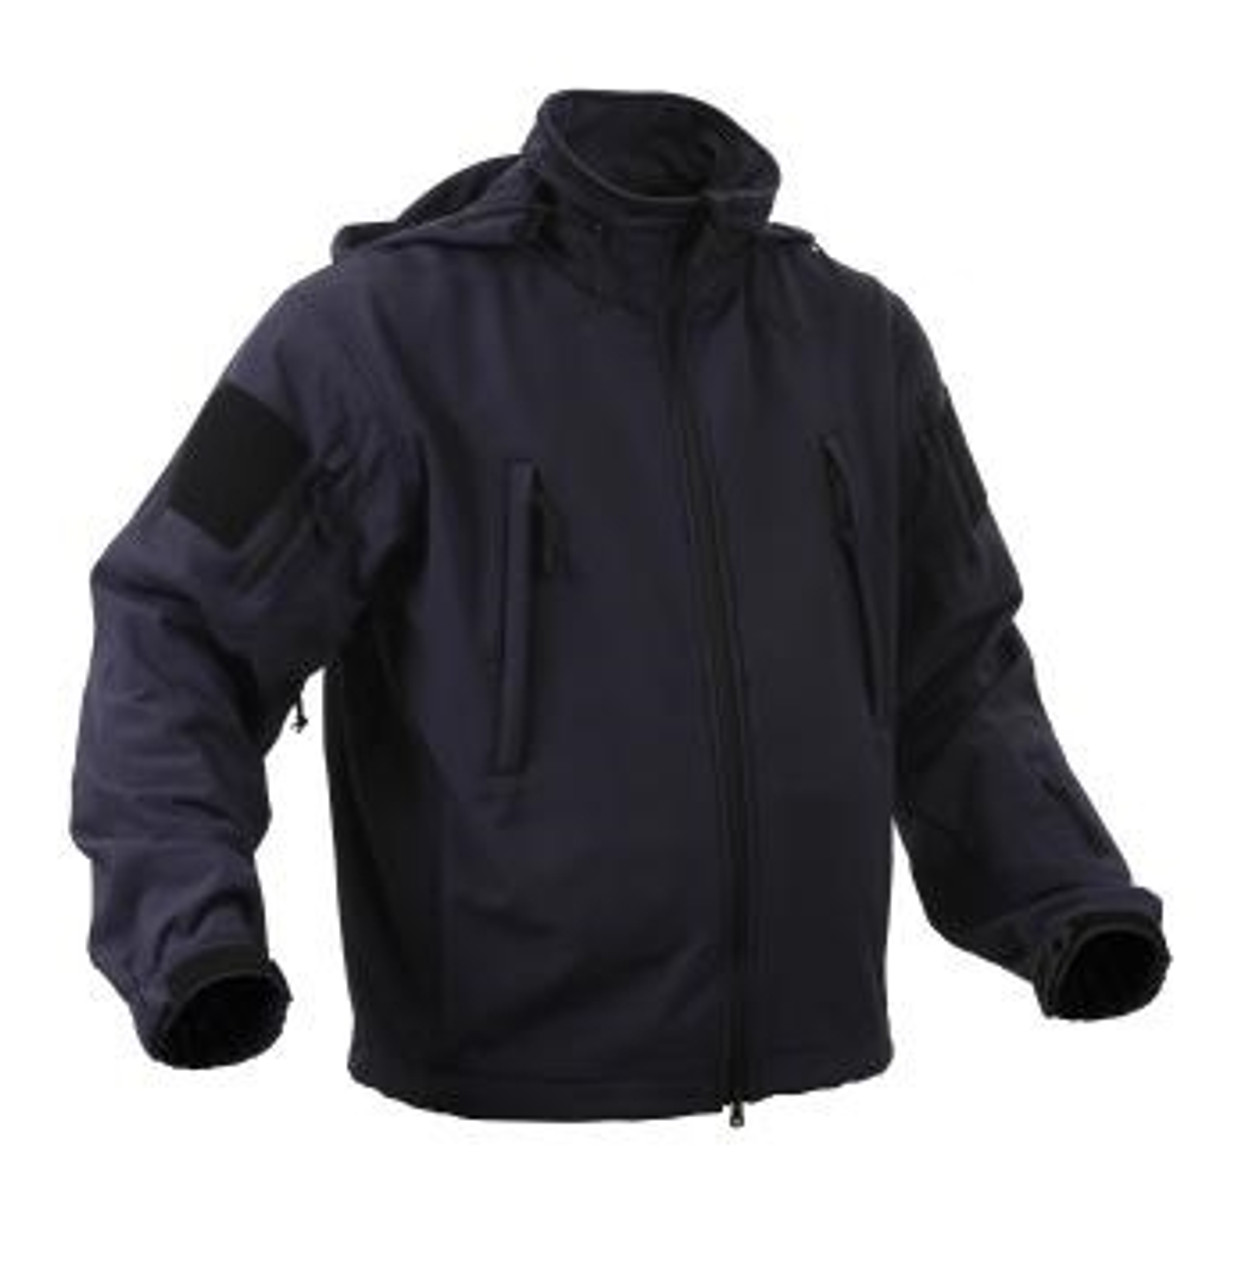 Special Ops Tactical Softshell Jacket - Navy Blue from Hessen Surplus